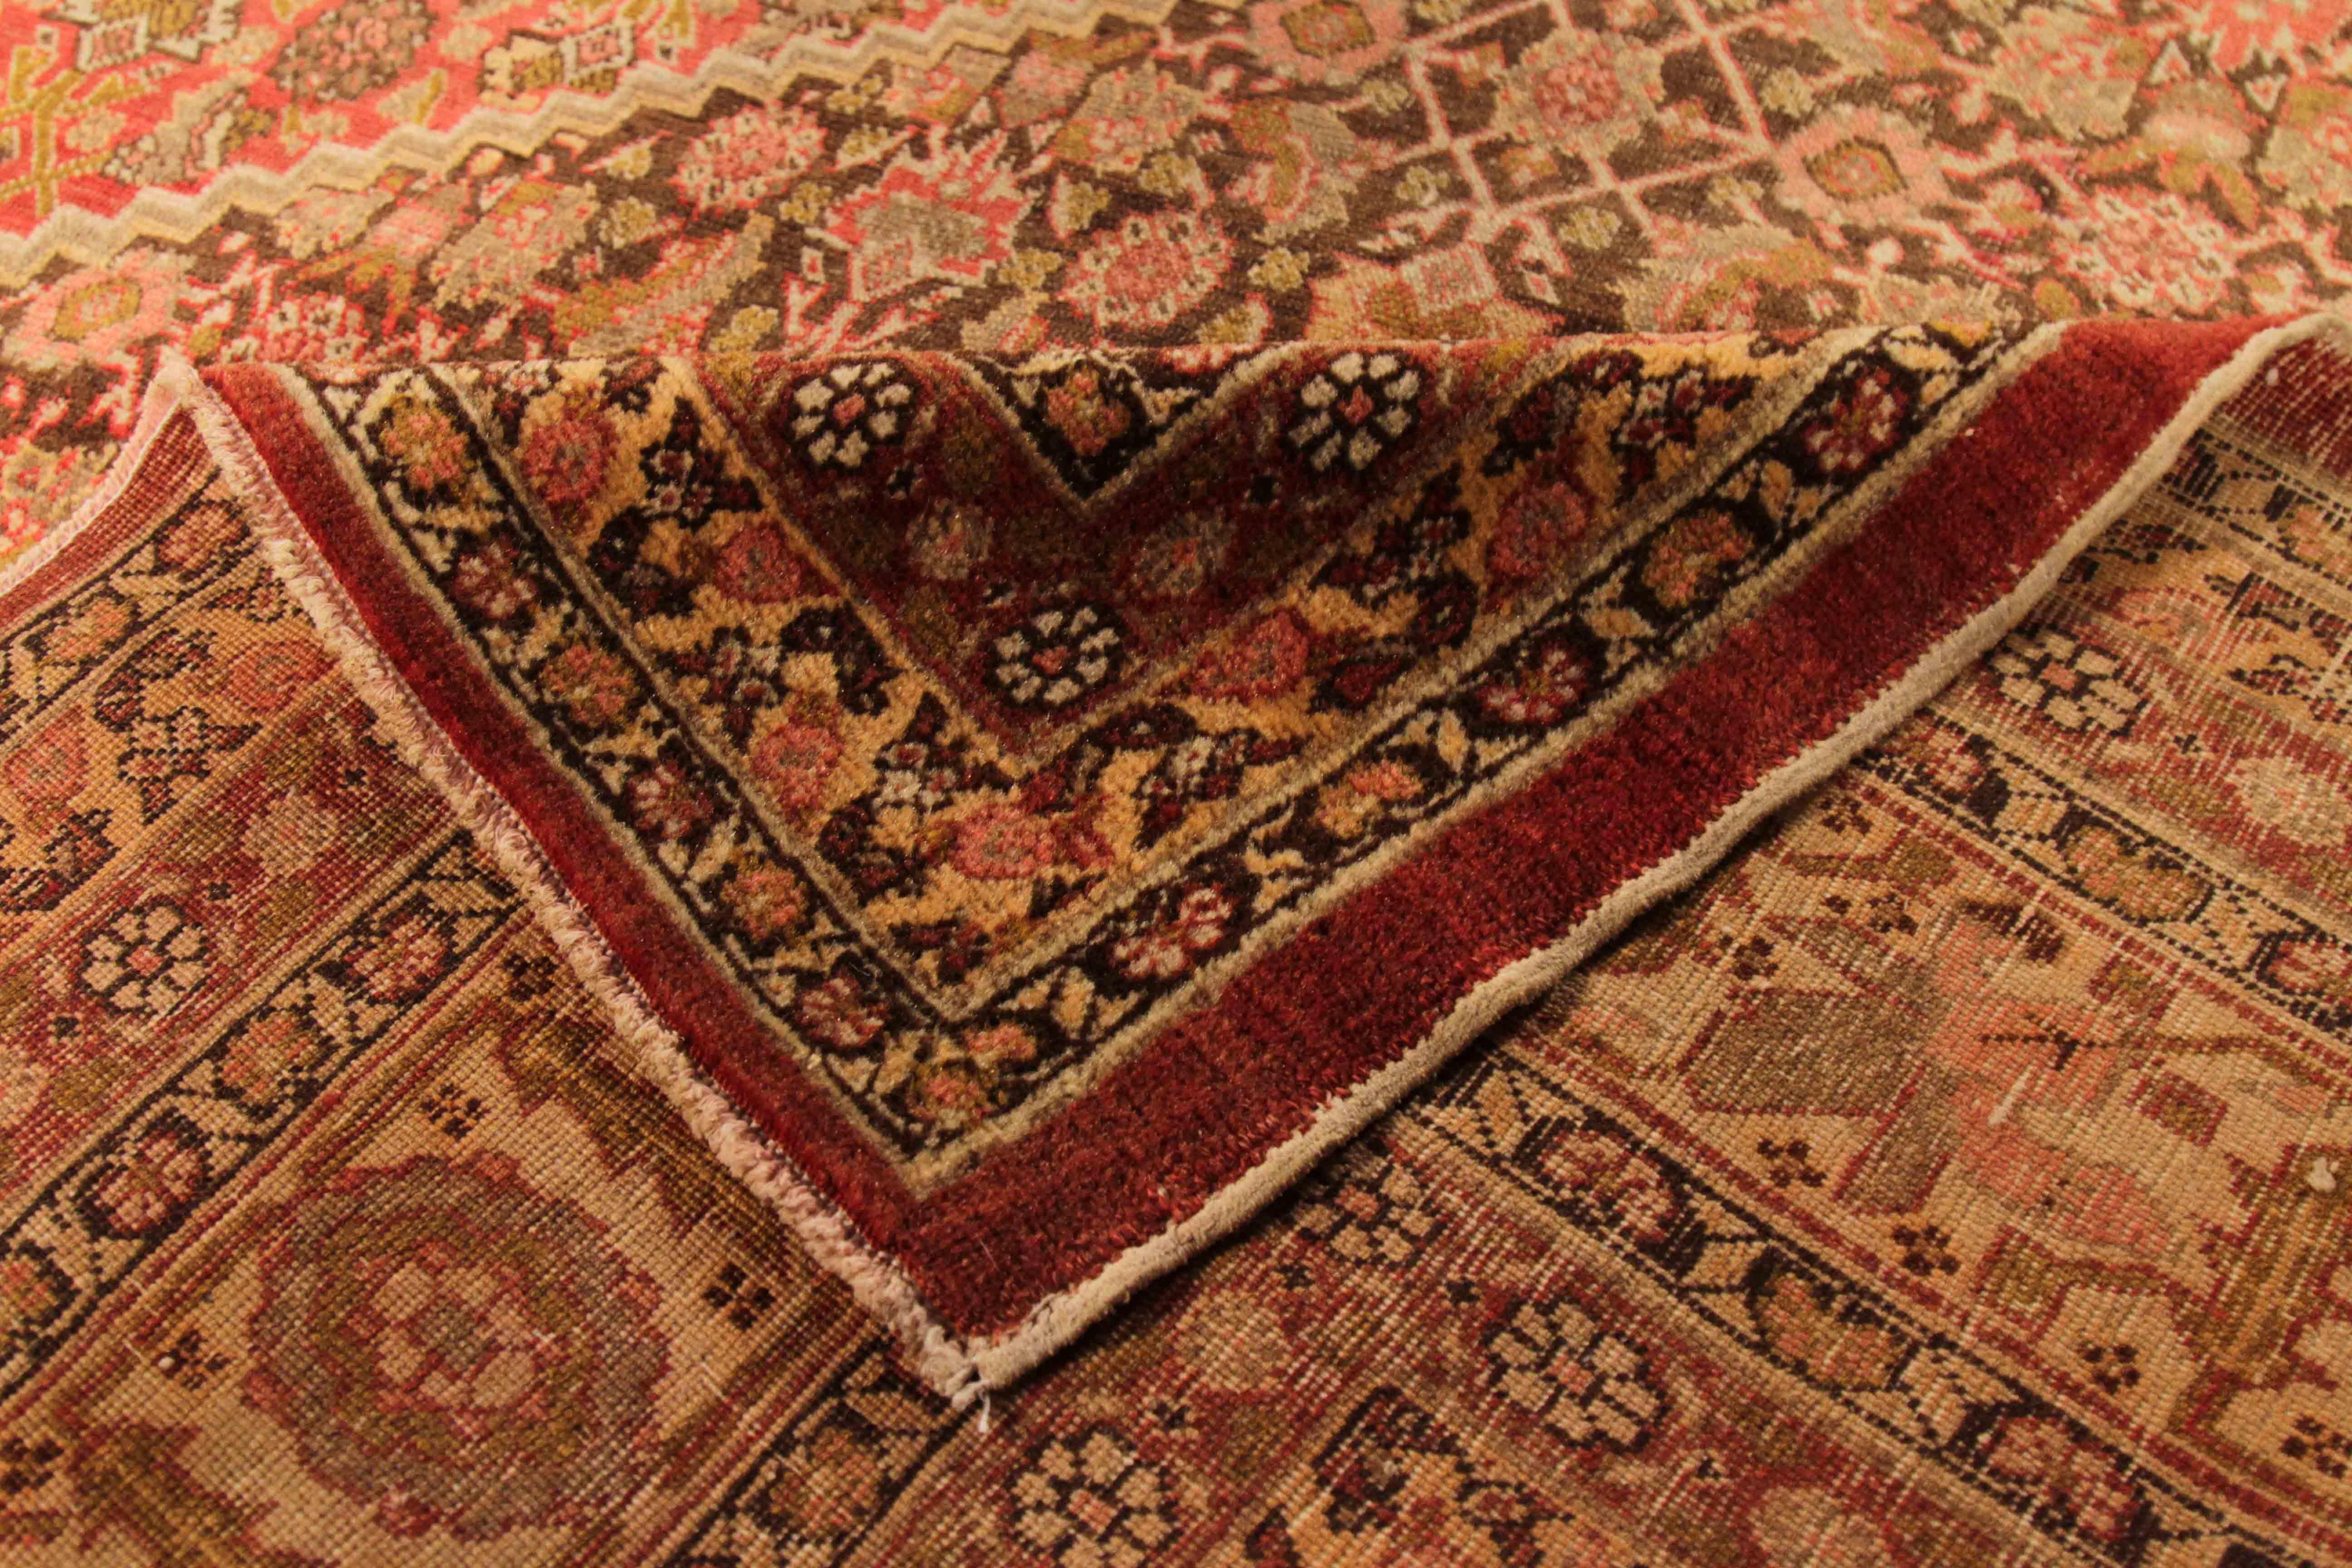 Early 20th Century Antique Persian Tabriz Rug with Large Diamond and Floral Patterns, circa 1910s For Sale